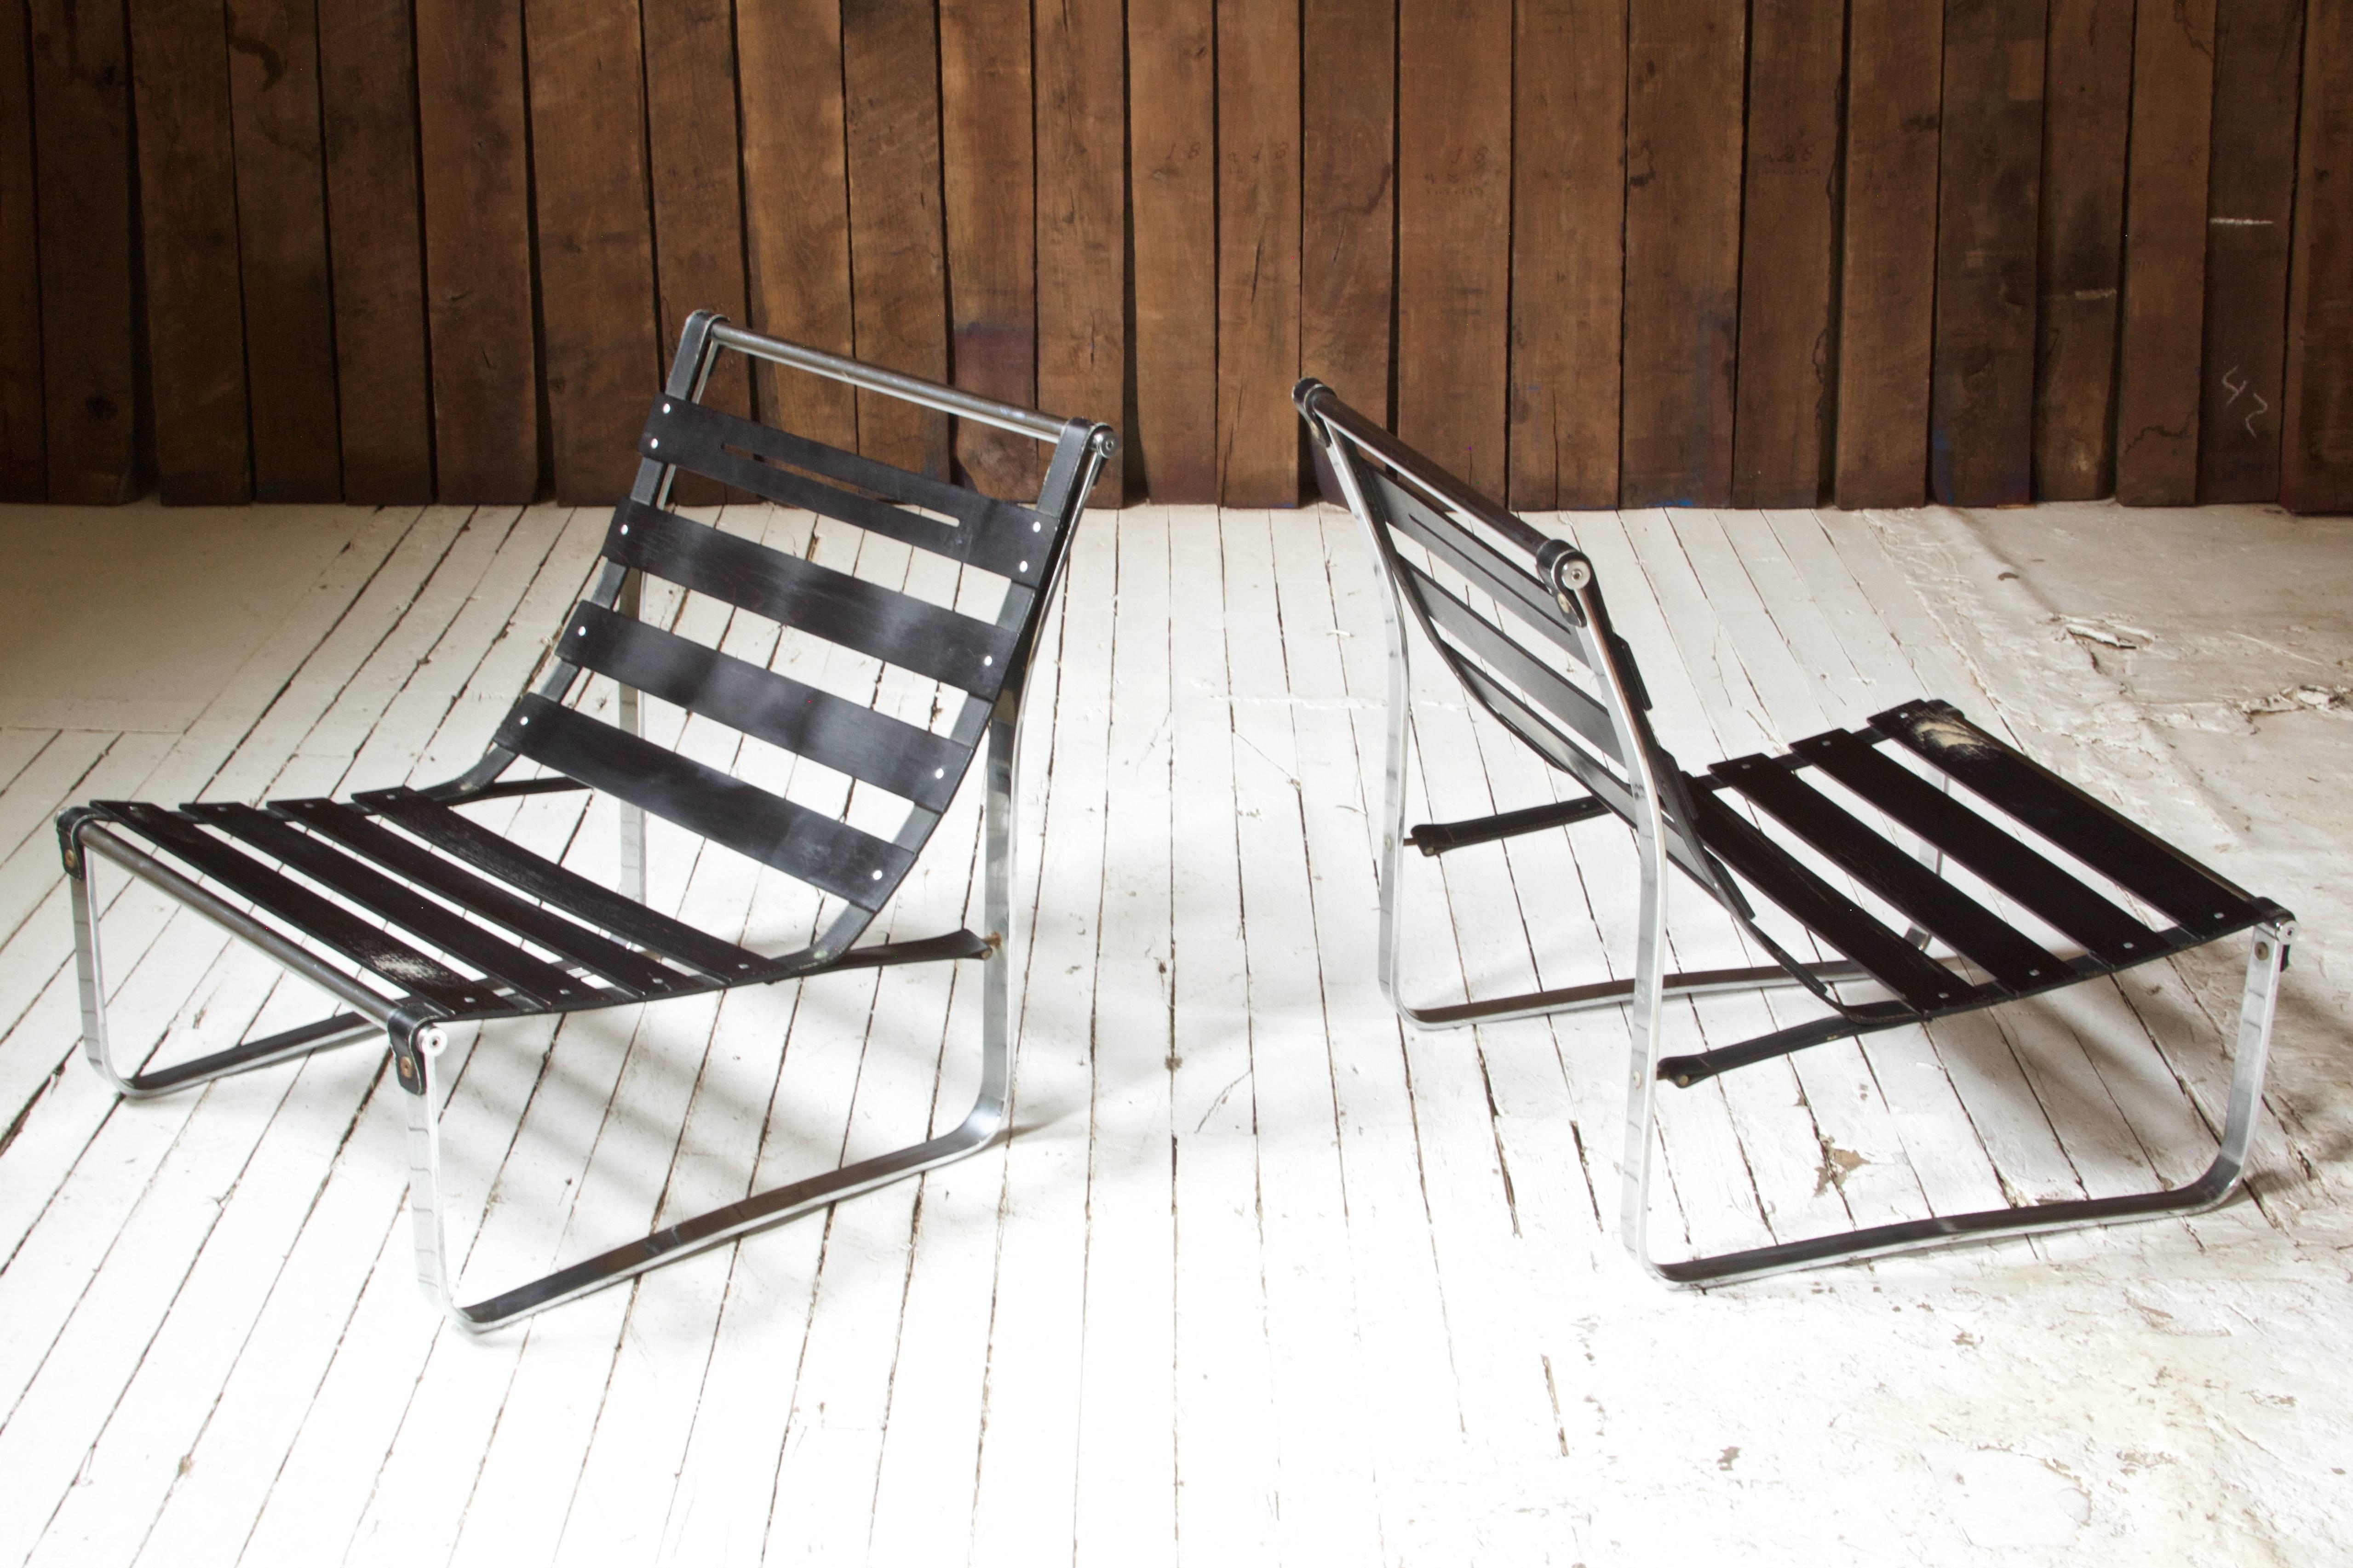 Vintage pair of chrome-plated steel, leather and painted-wood lounge chair frames attributed to Kho Liang Ie for Artifort; 1960s. This design allows the frames to flex under the weight of a sitter, making for a very comfortable and weightless seat.